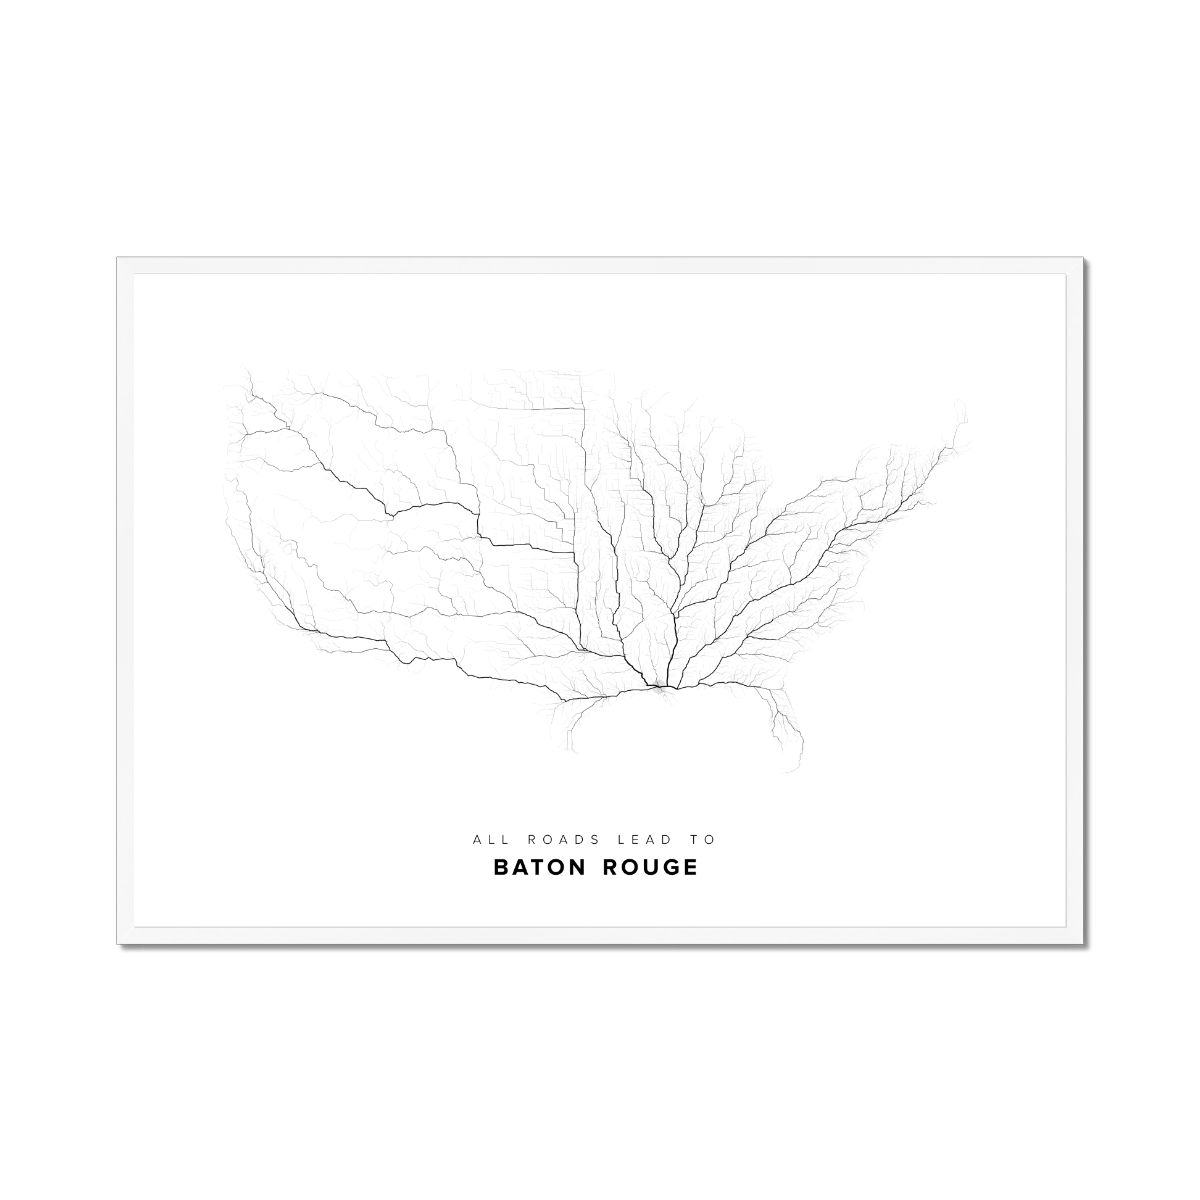 All roads lead to Baton Rouge (United States of America) Fine Art Map Print